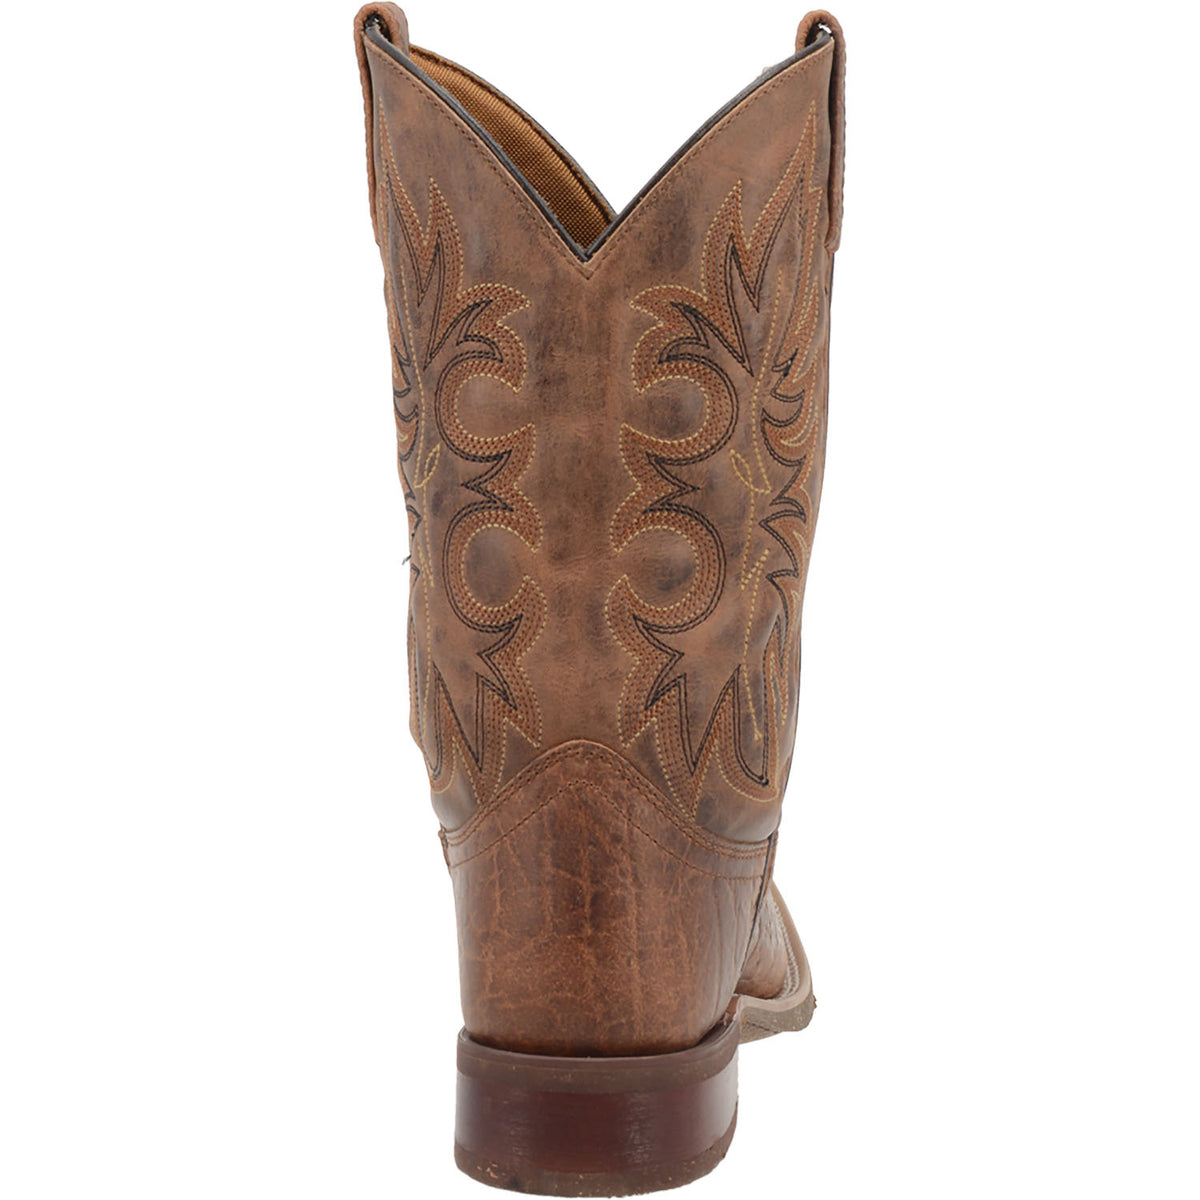 DURANT LEATHER BOOT Cover